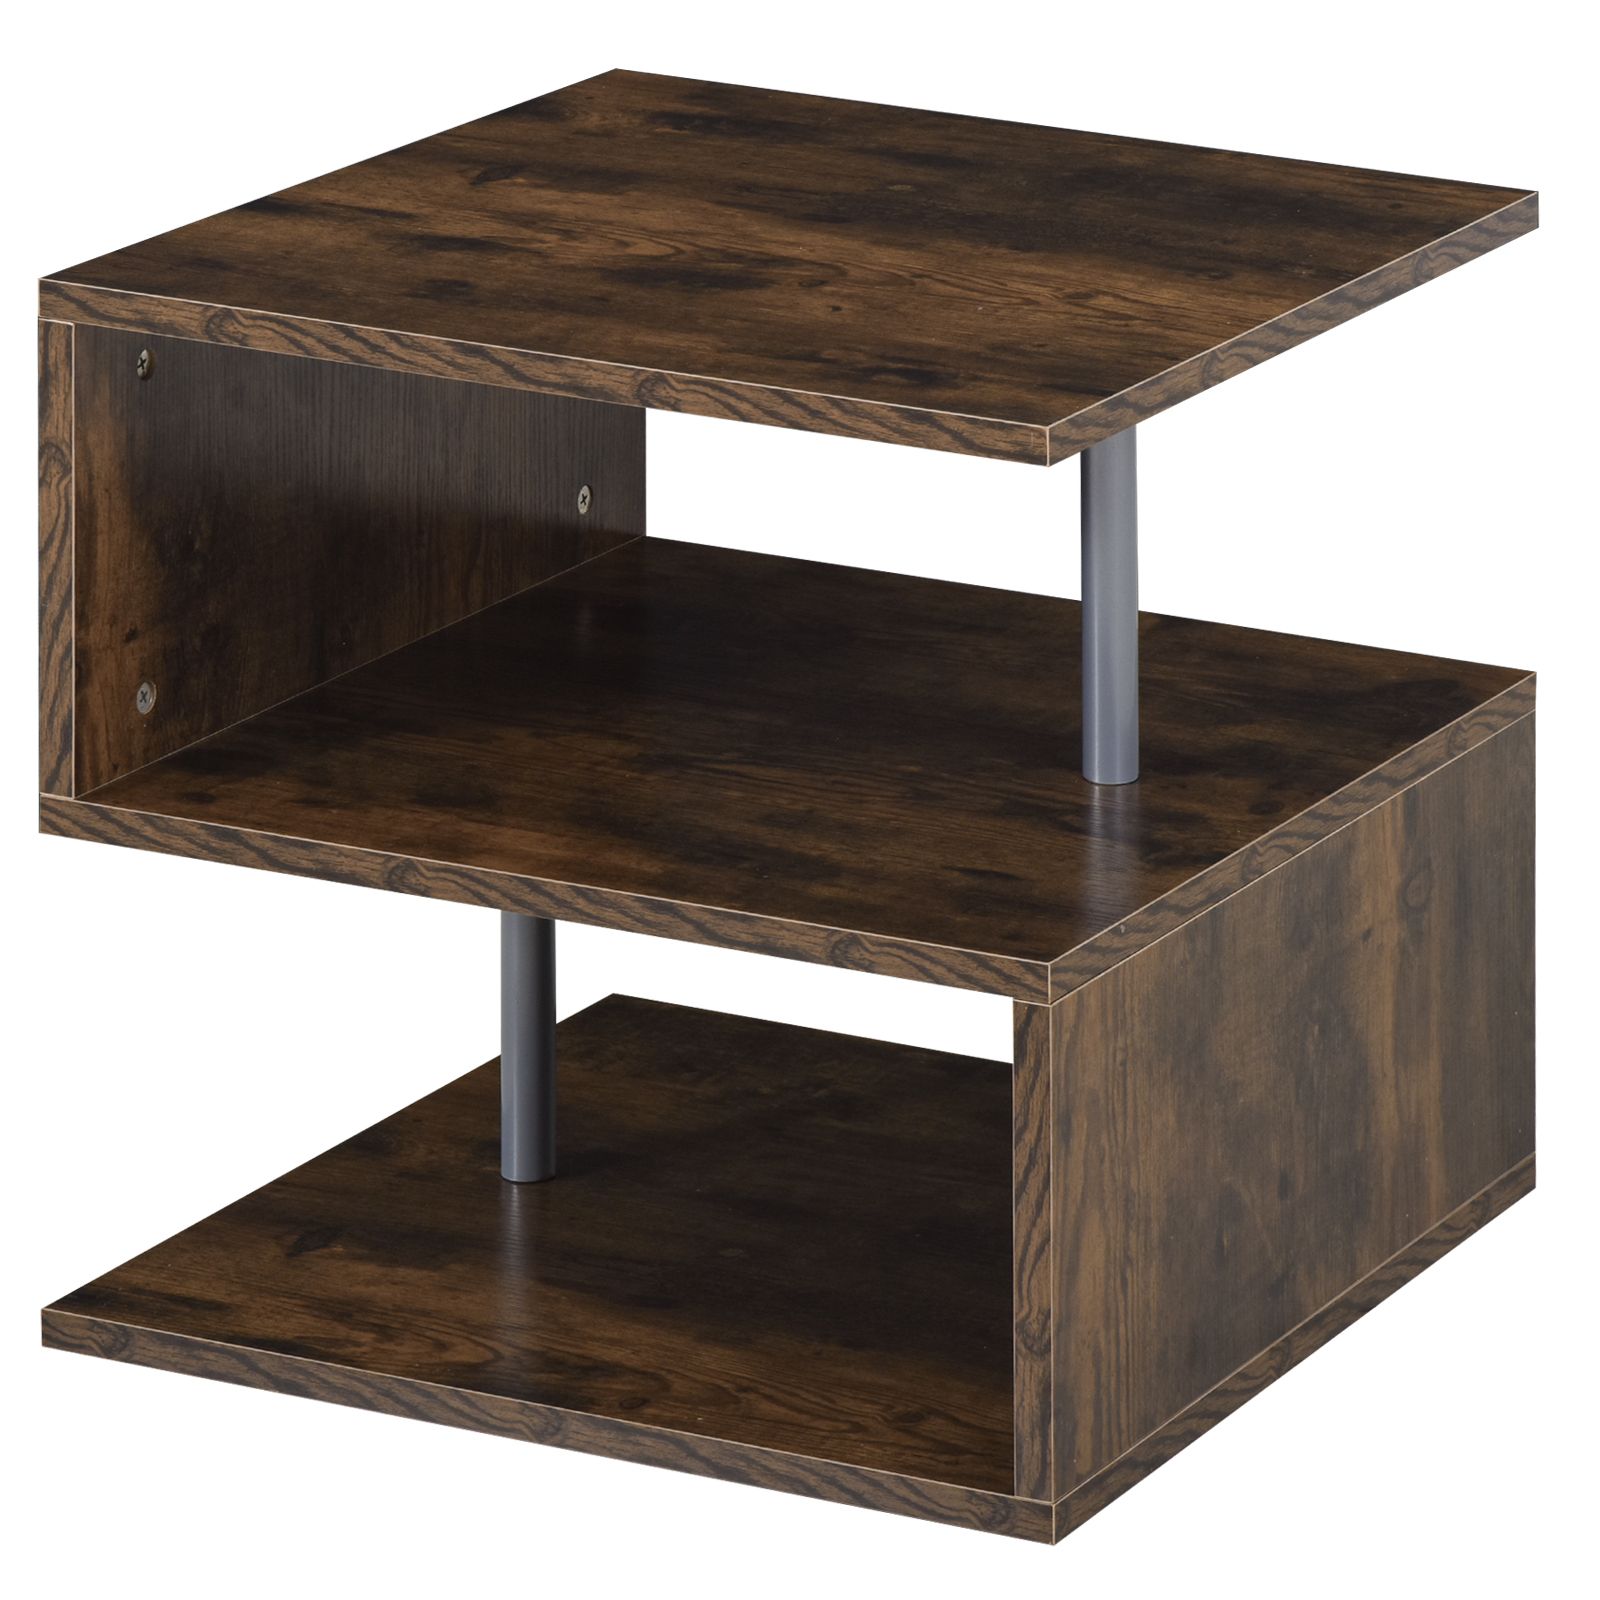 Homcom Coffee End Table S Shape 2 Tier Storage Shelves Organizer With Regard To Wood Coffee Tables With 2 Tier Storage (Photo 14 of 15)